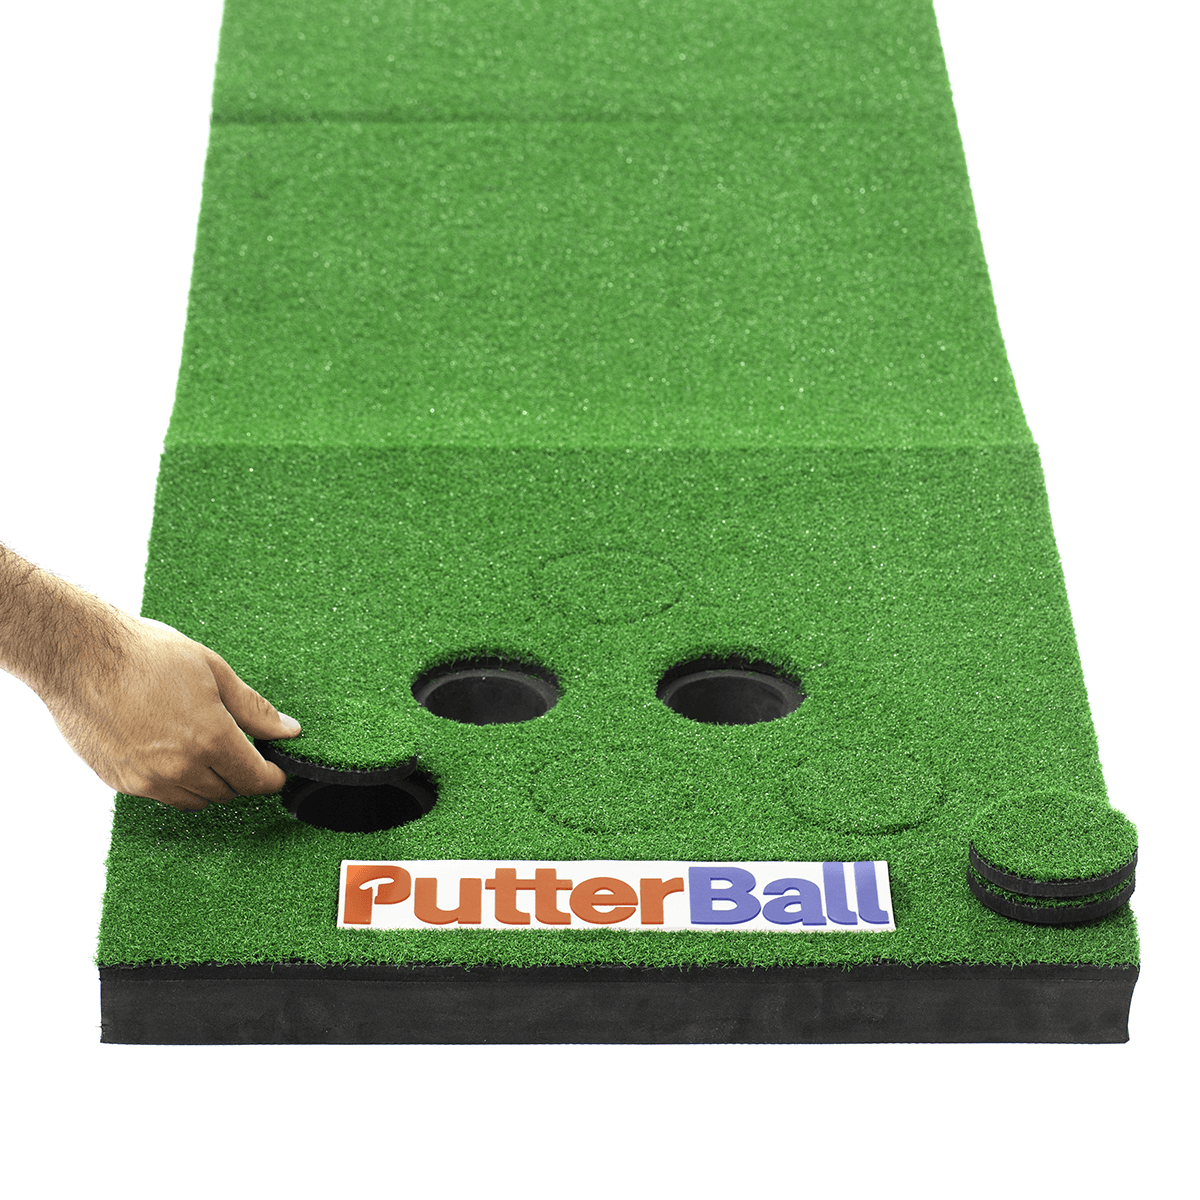 PUTTERBALL GAME by PutterBall